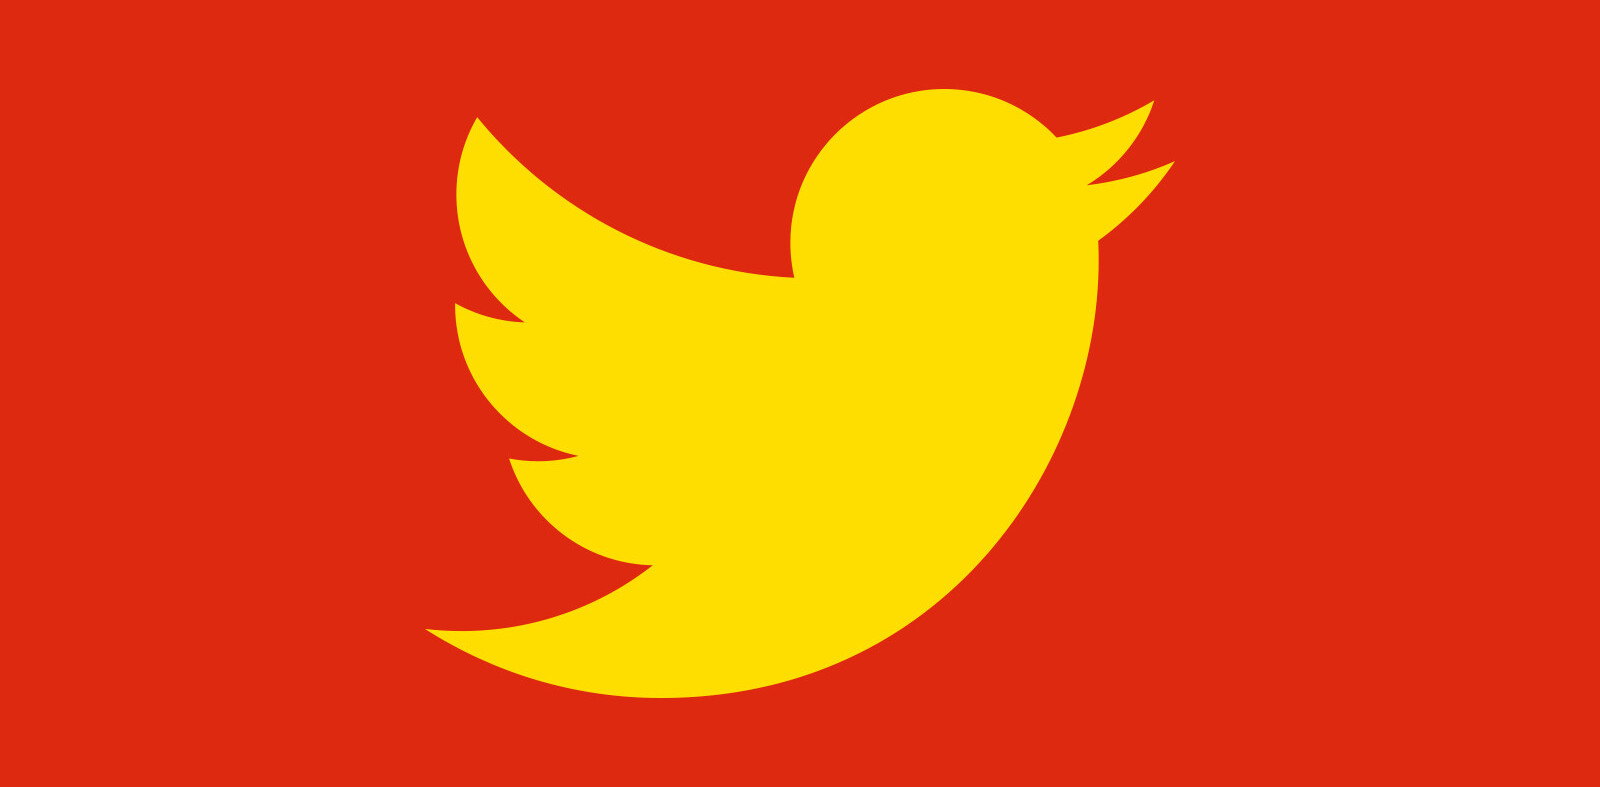 China is paying Twitter to publish propaganda against Hong Kong protesters